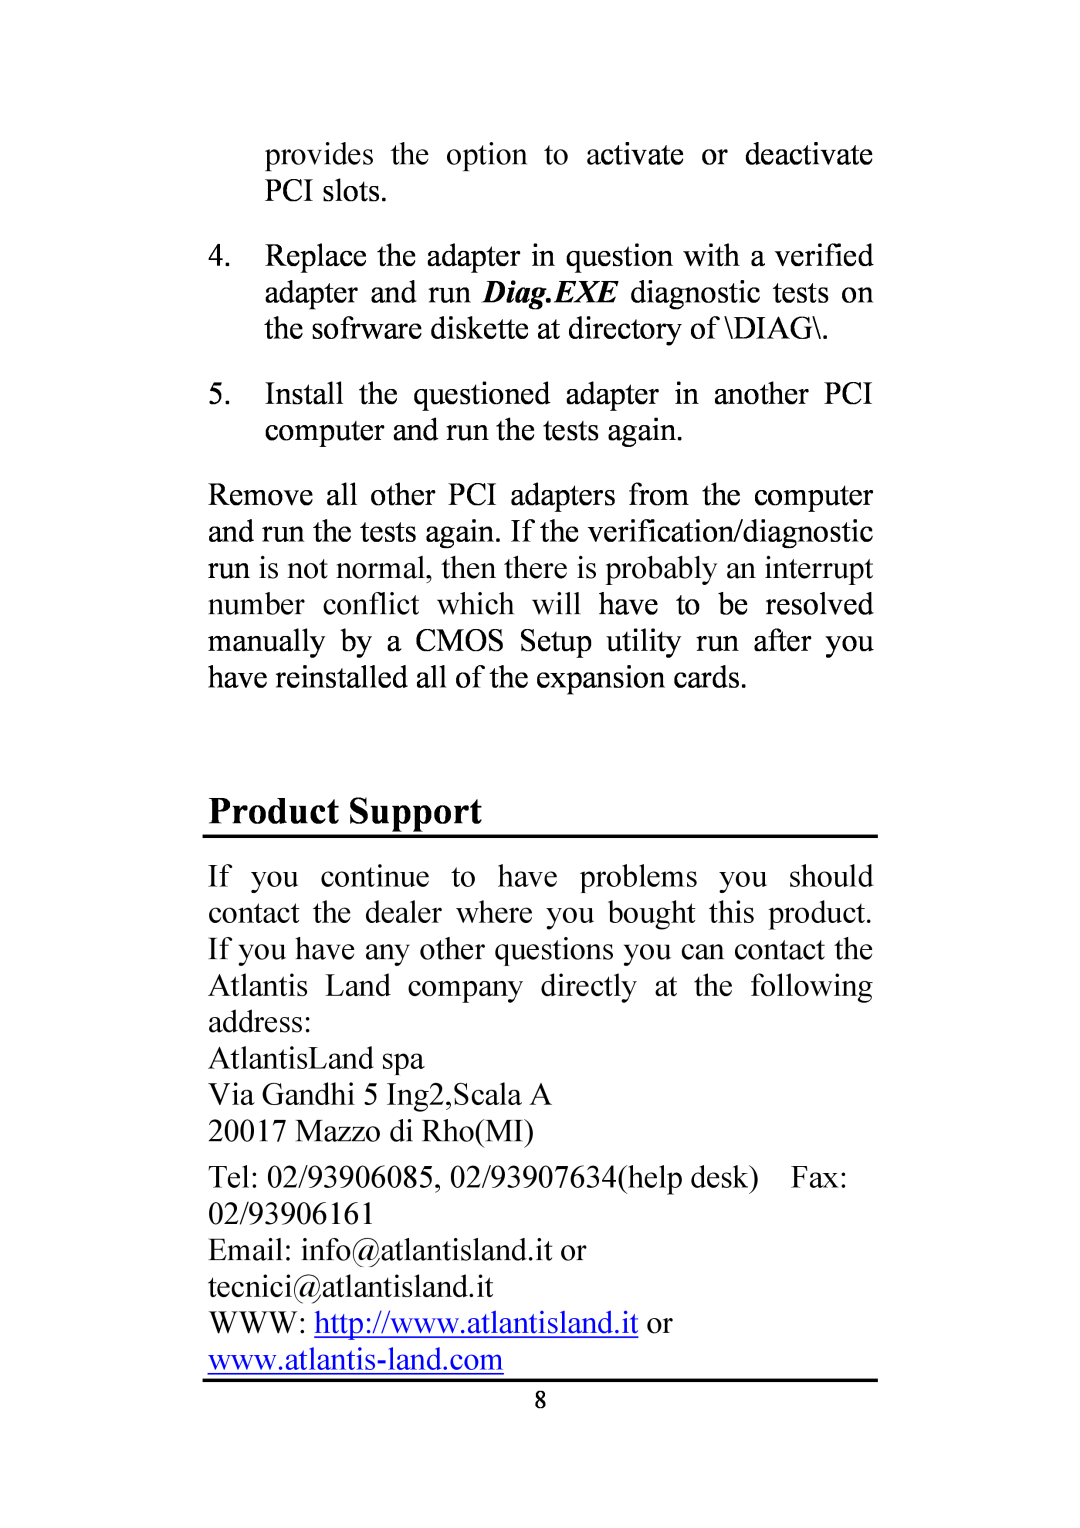 Atlantis Land A02-S32-S/M2 manual Product Support 